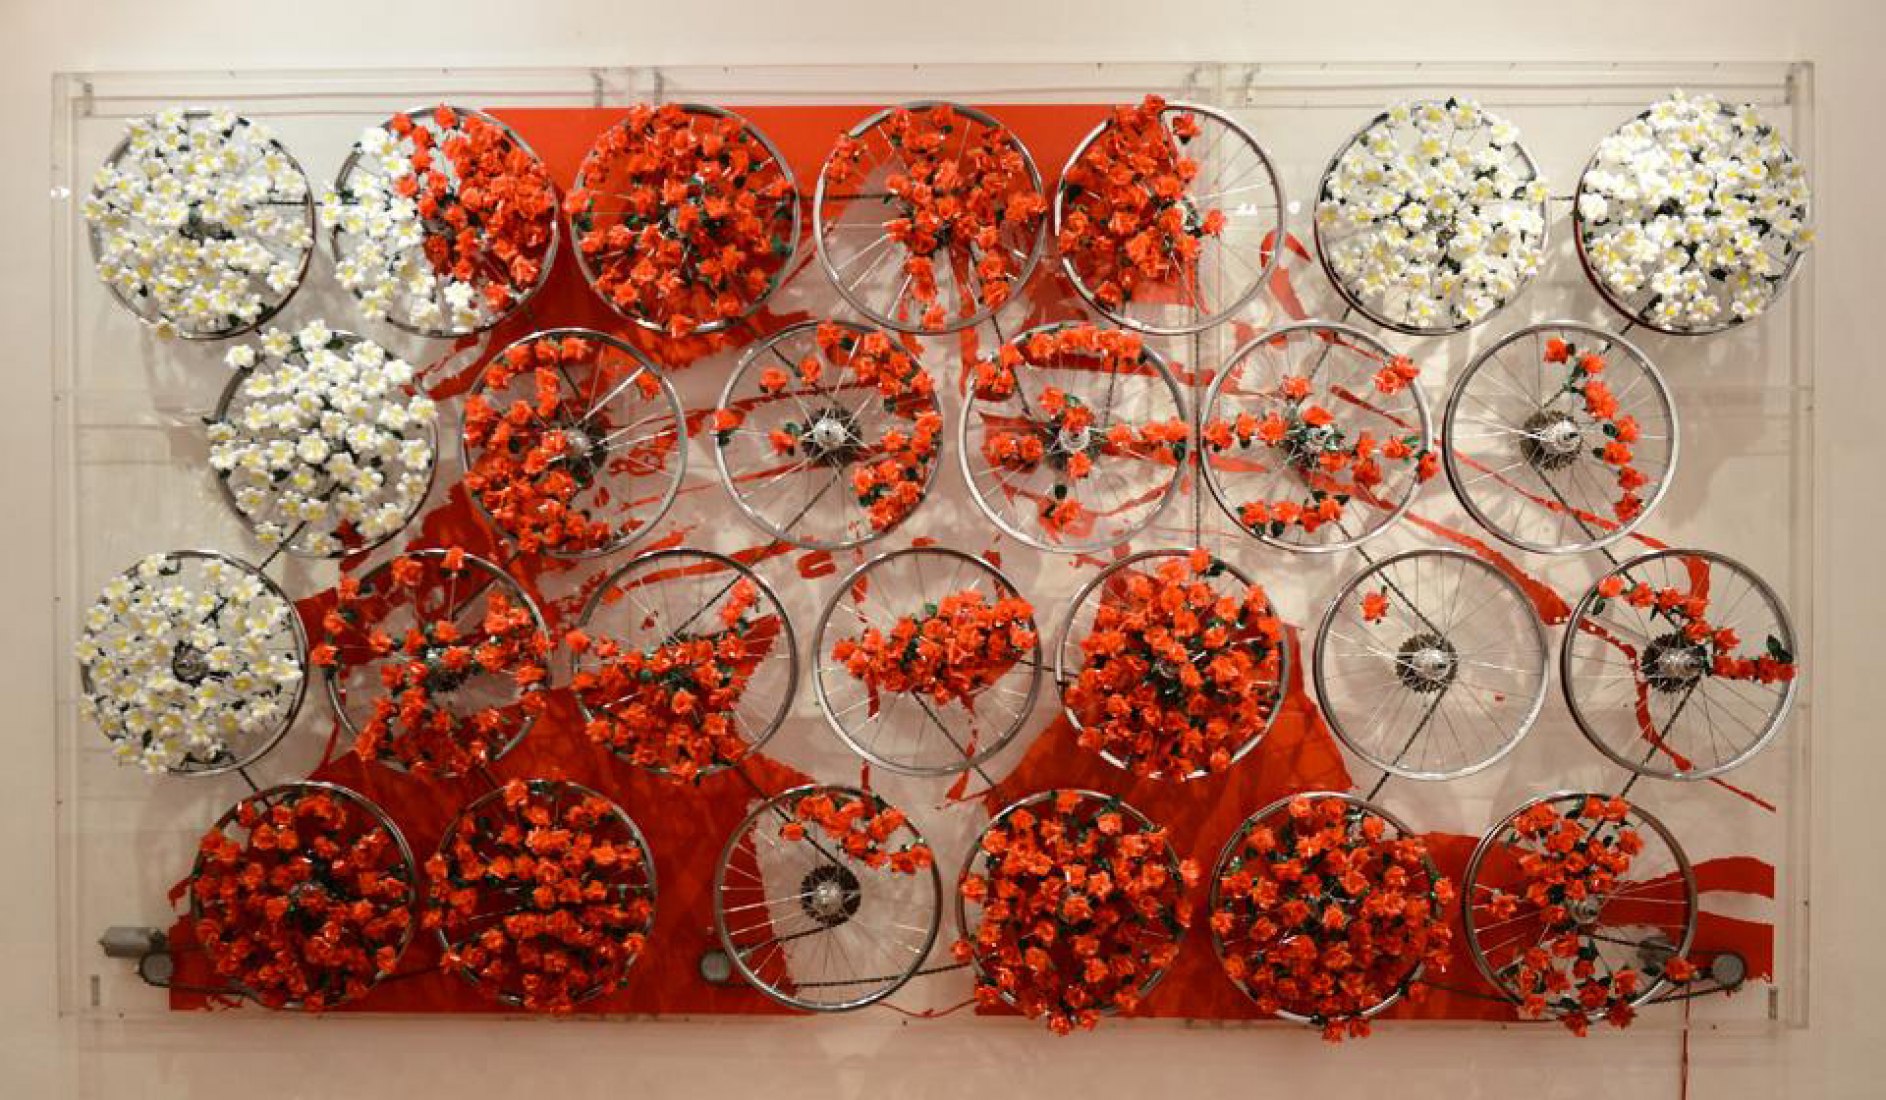 Simplemente bellas, 2012, by Mabel Poblet Pujol. 200 x 300 x 15 cm., Plastic flowers, bicycle tires, electric motors, acrylic plates. Raquel Ponce Gallery.